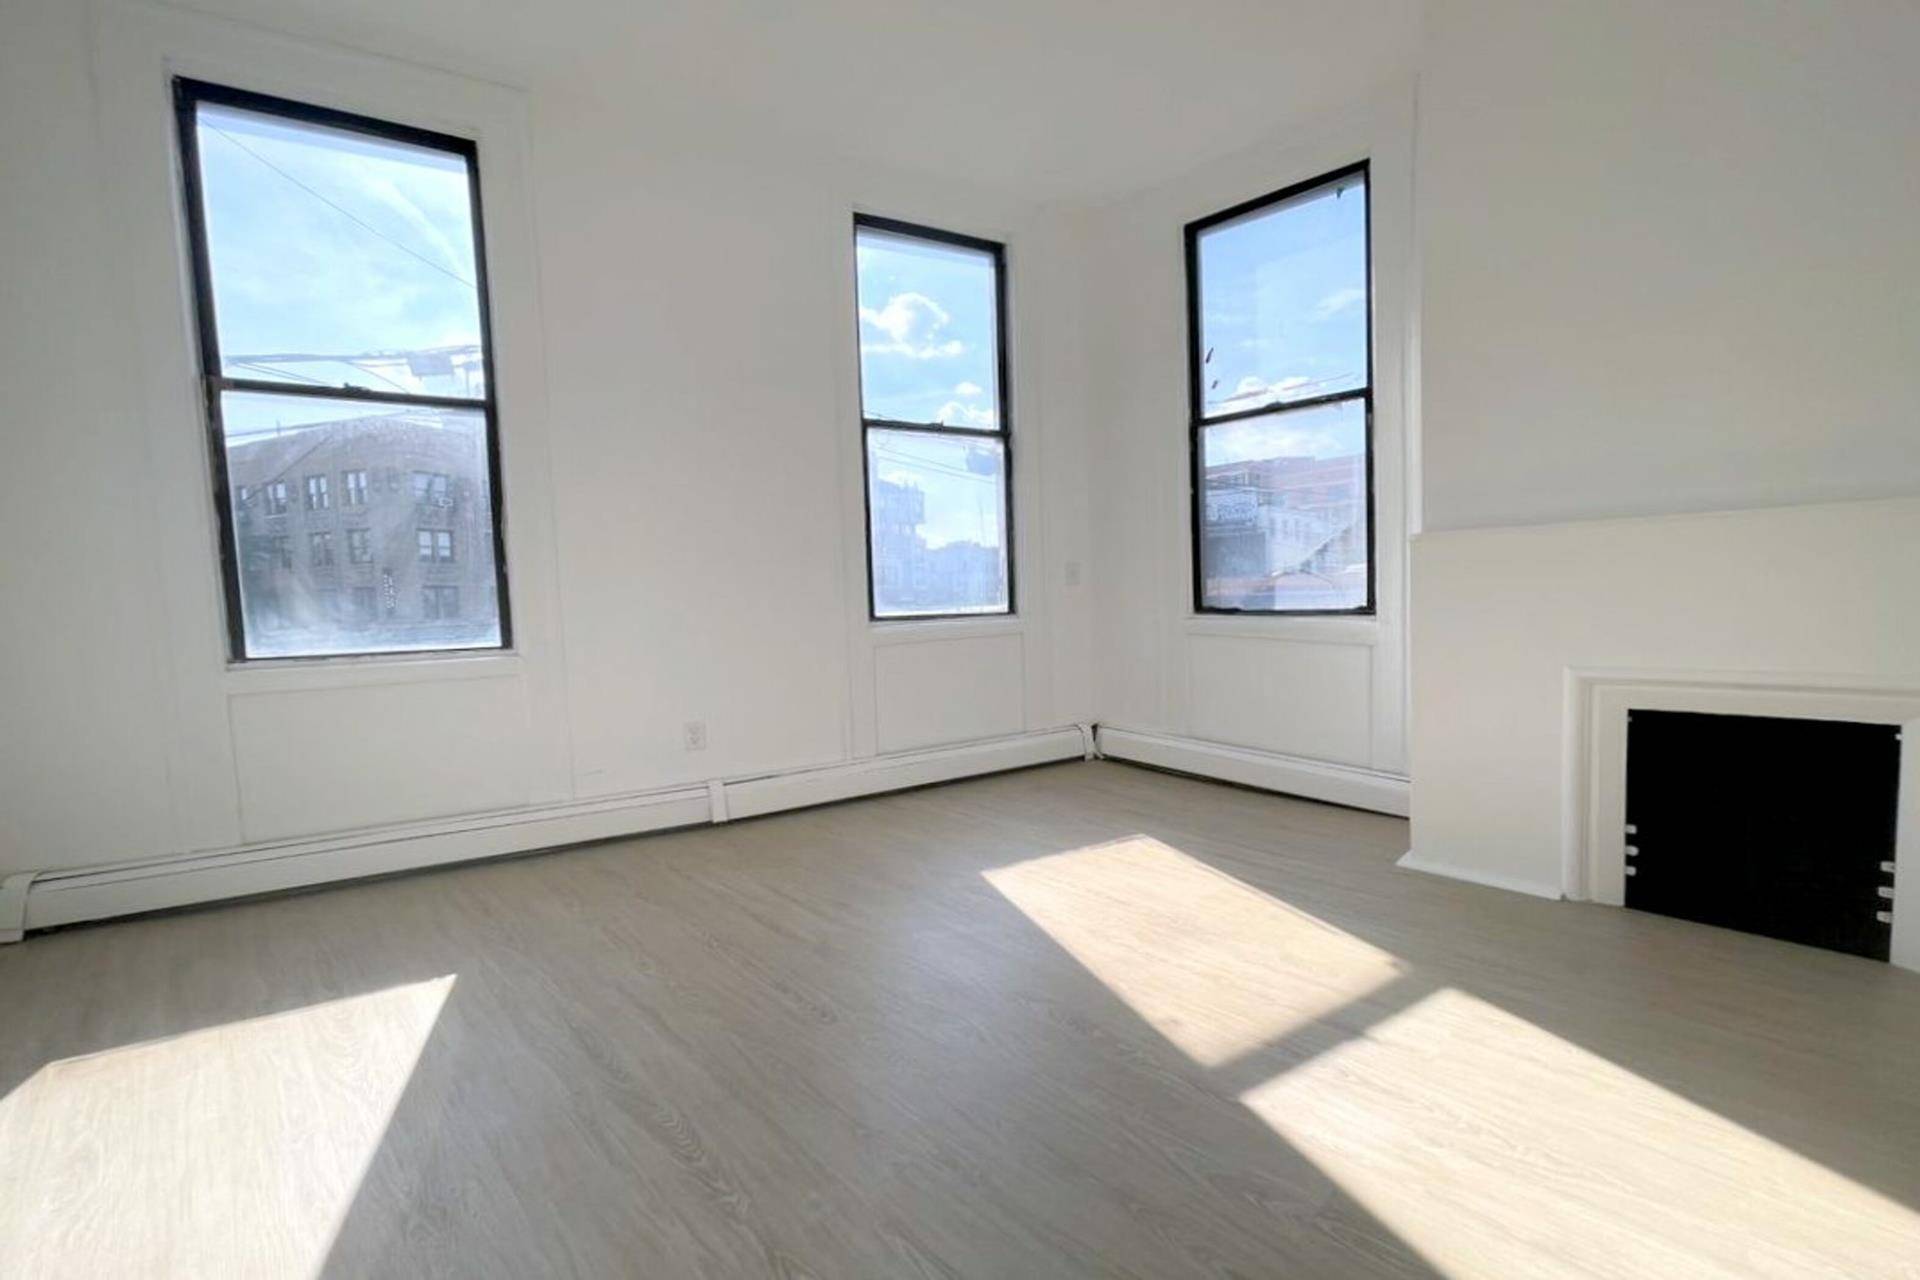 ALL INQUIRIES VIA WEBSITE OR EMAIL ONLY, PLEASEFor May 1st start date 14 month leaseWelcome home to your newly renovated two bedroom in the heart of Bushwick.